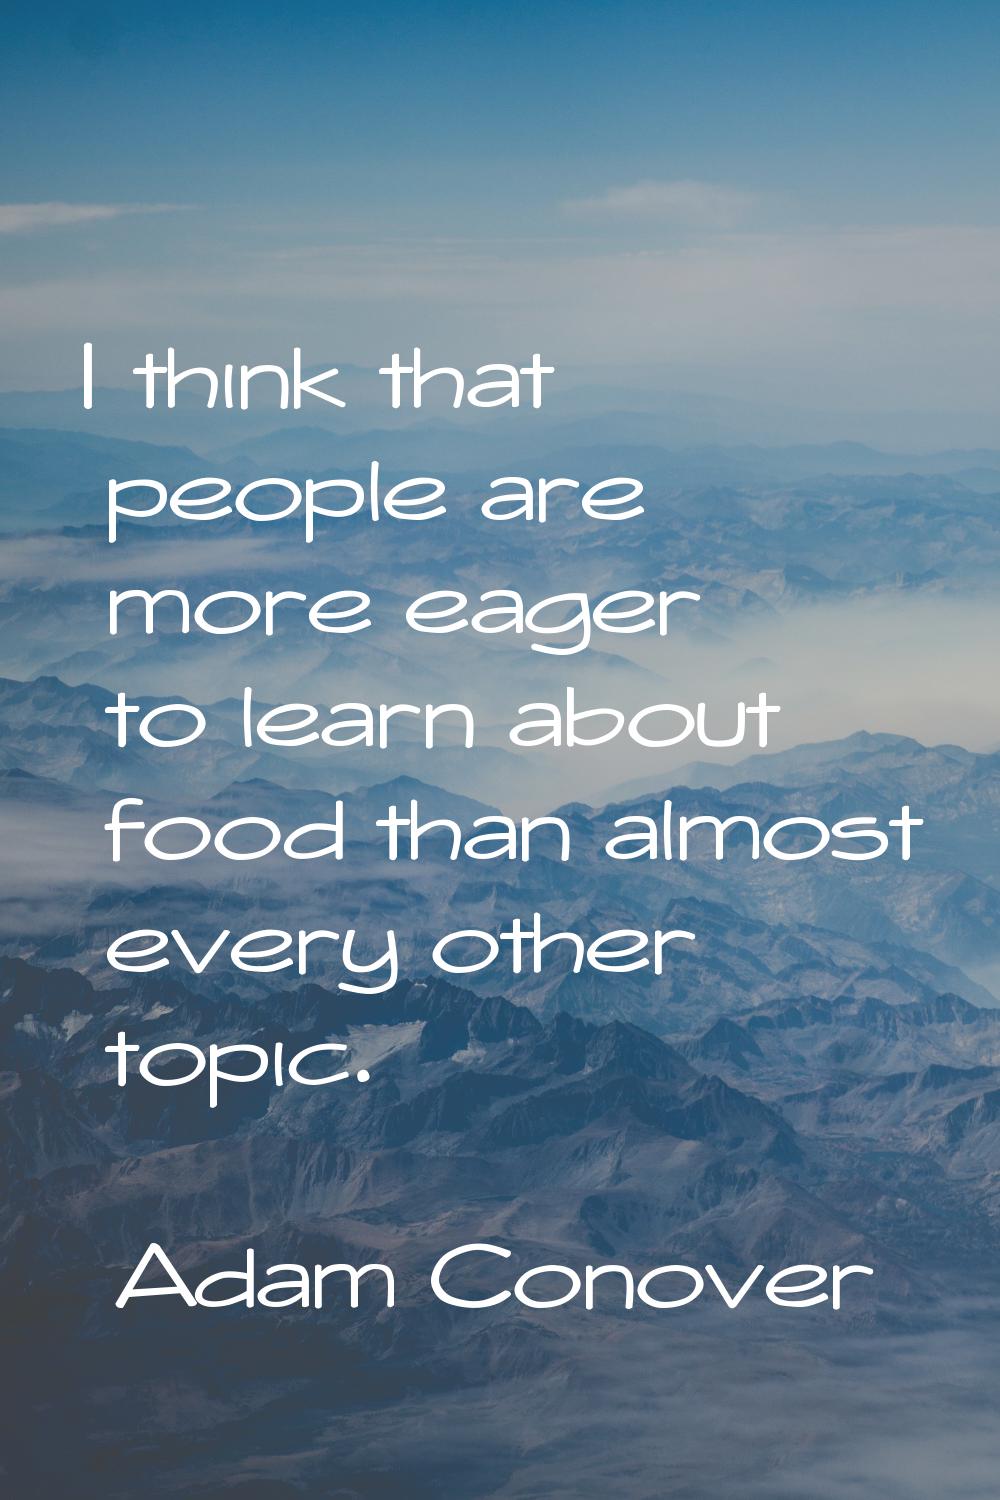 I think that people are more eager to learn about food than almost every other topic.